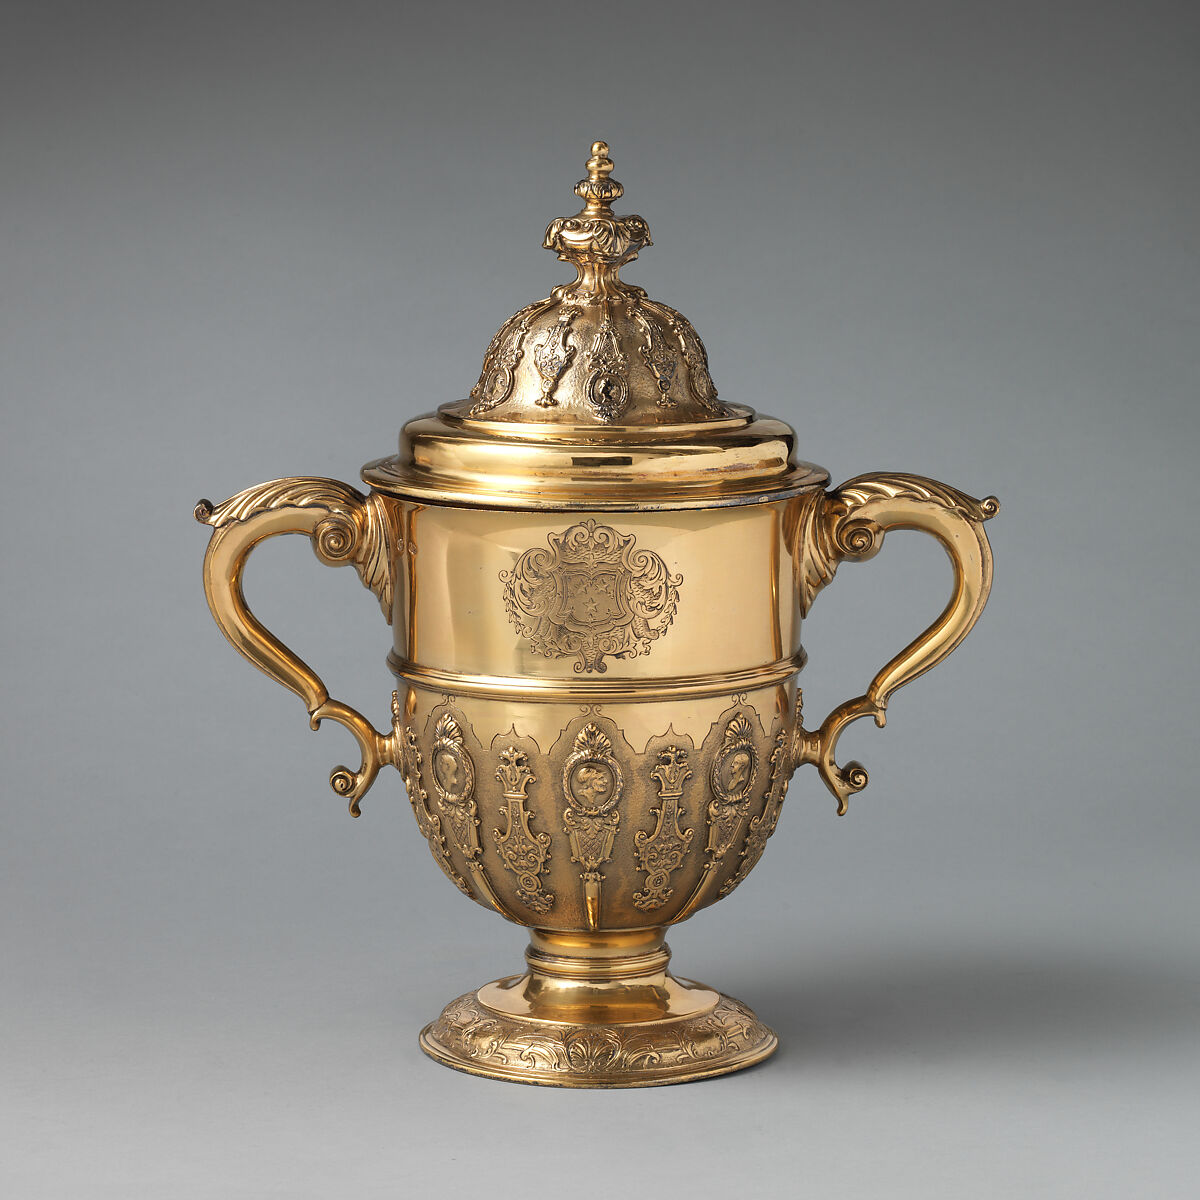 Two-handled cup with cover, Silver gilt, British, possibly London 